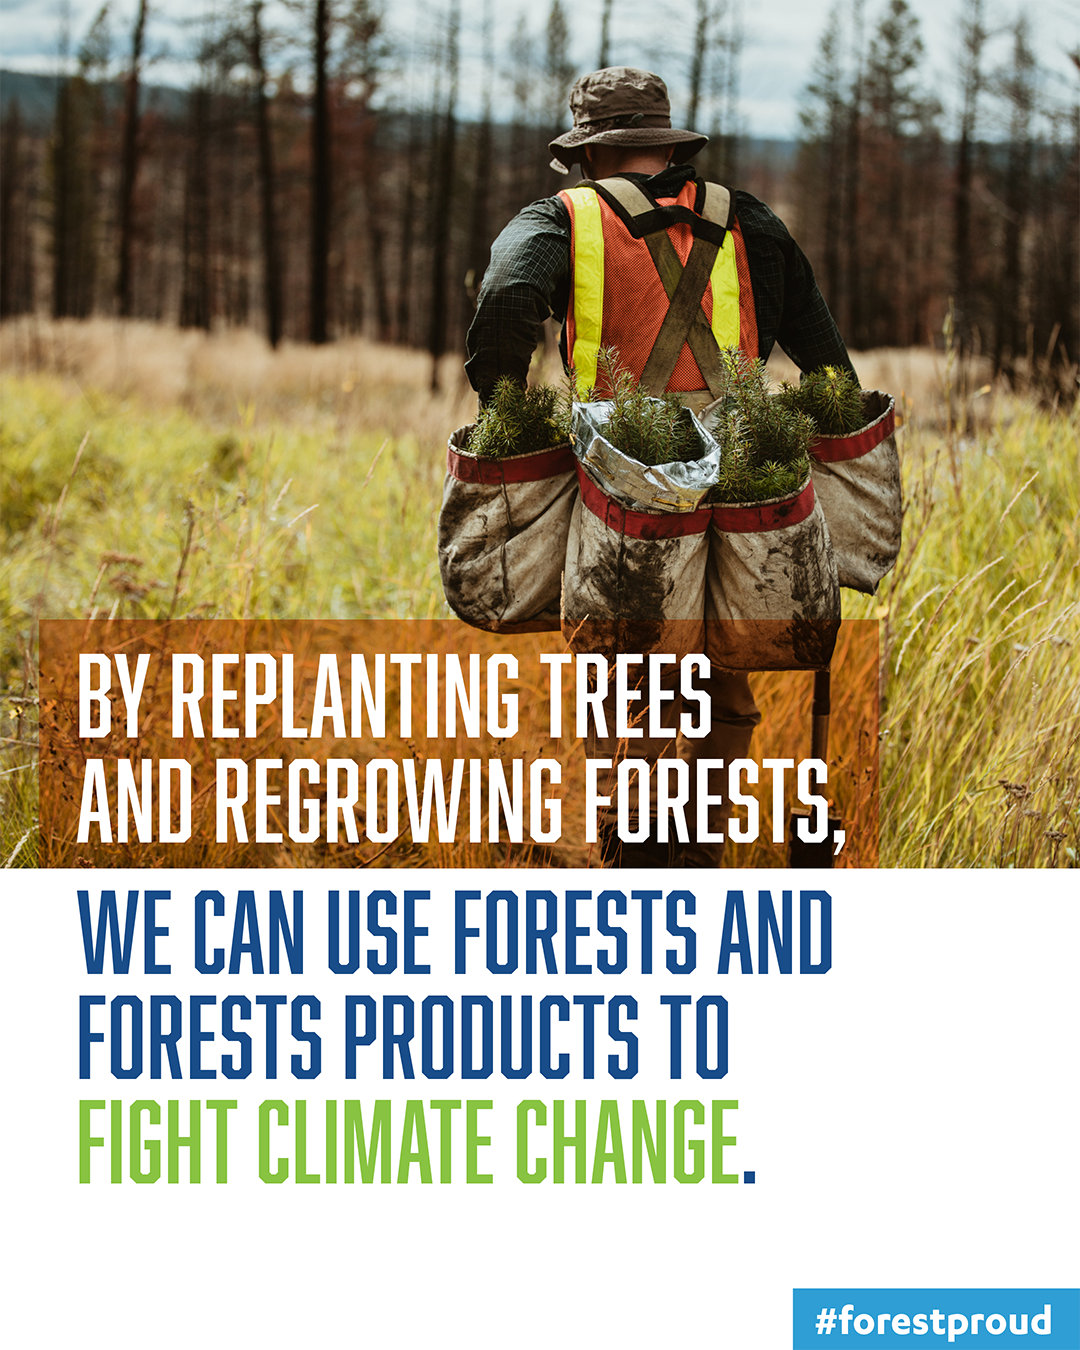 Forests + forest products store carbon, fight climate change